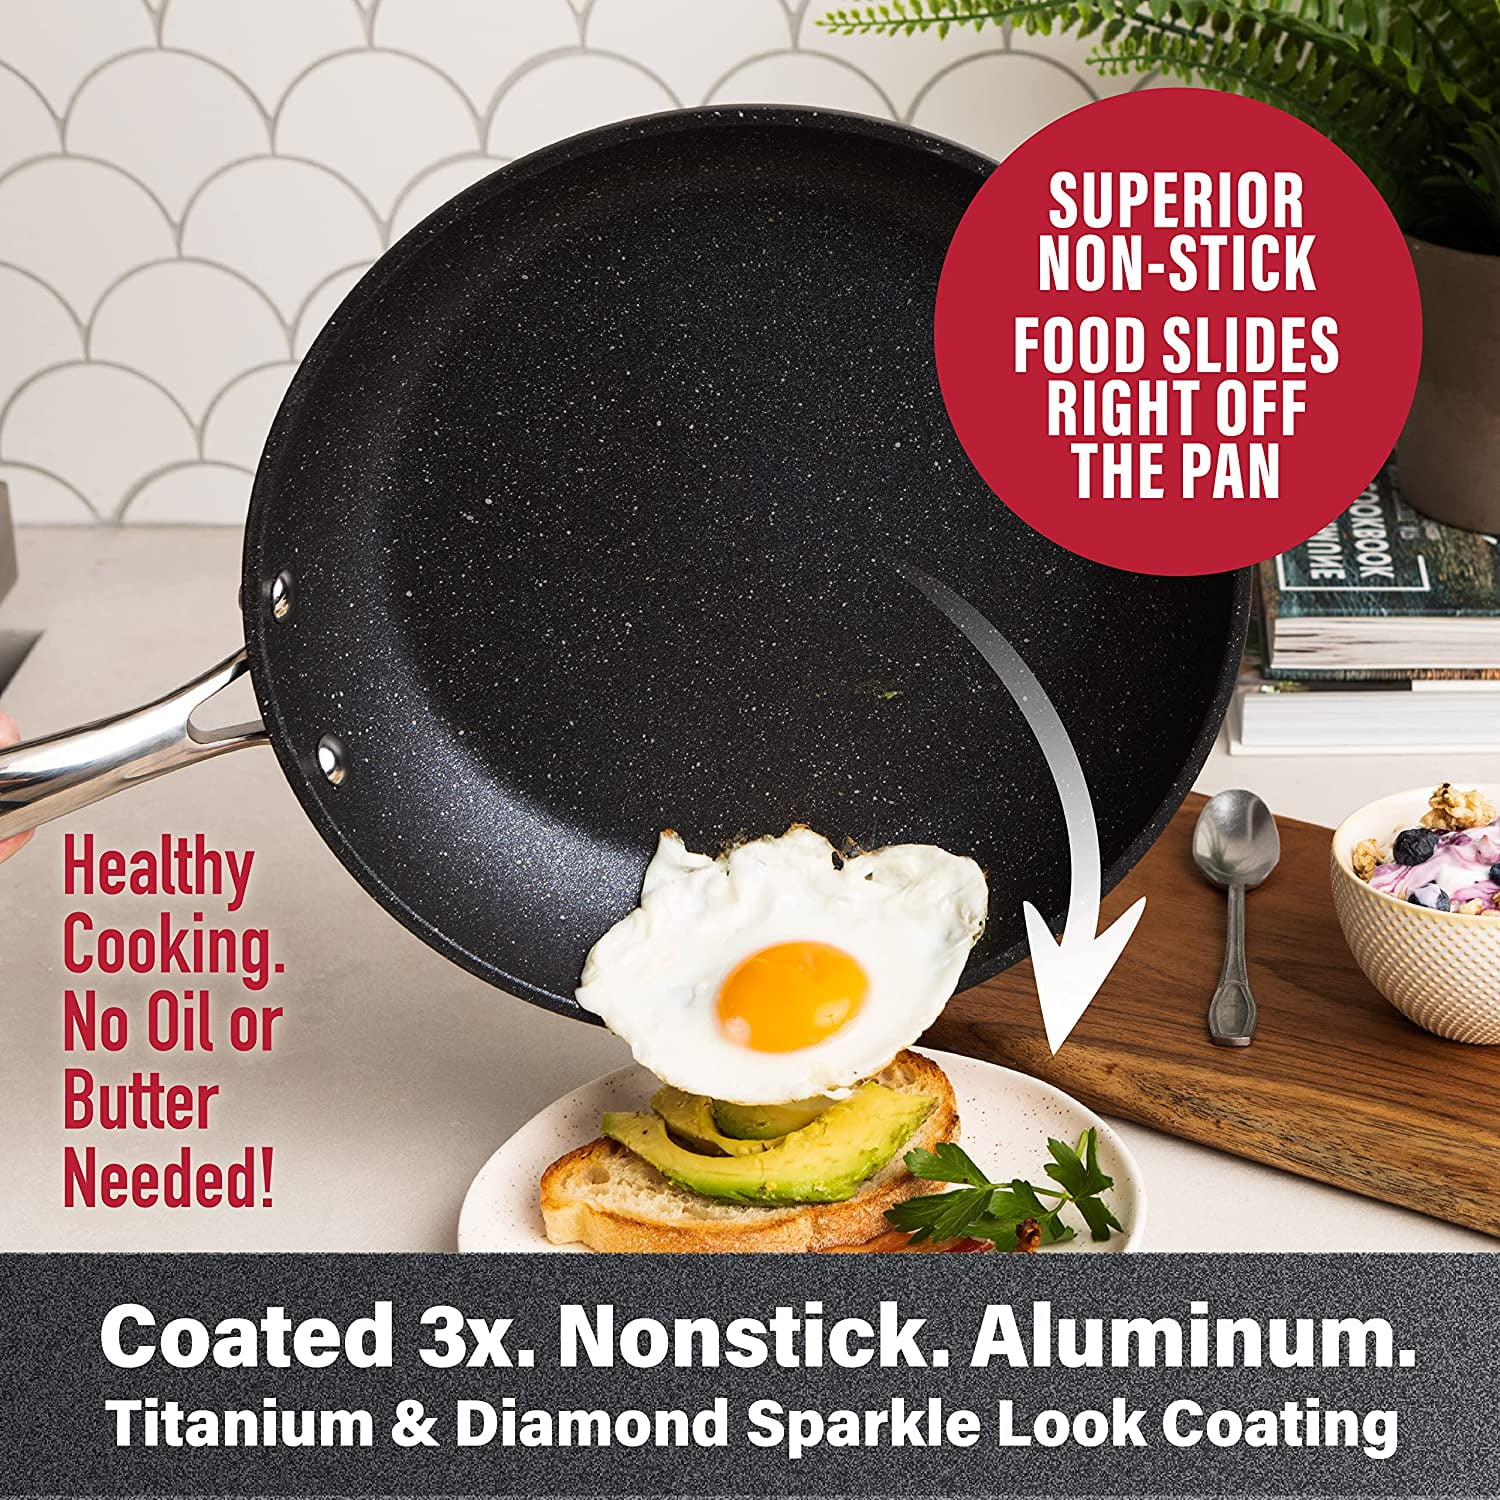 GraniteStone Diamond GraniteStone Diamond Emerald Green 13.97-in Aluminum  Cookware Set with Lid in the Cooking Pans & Skillets department at